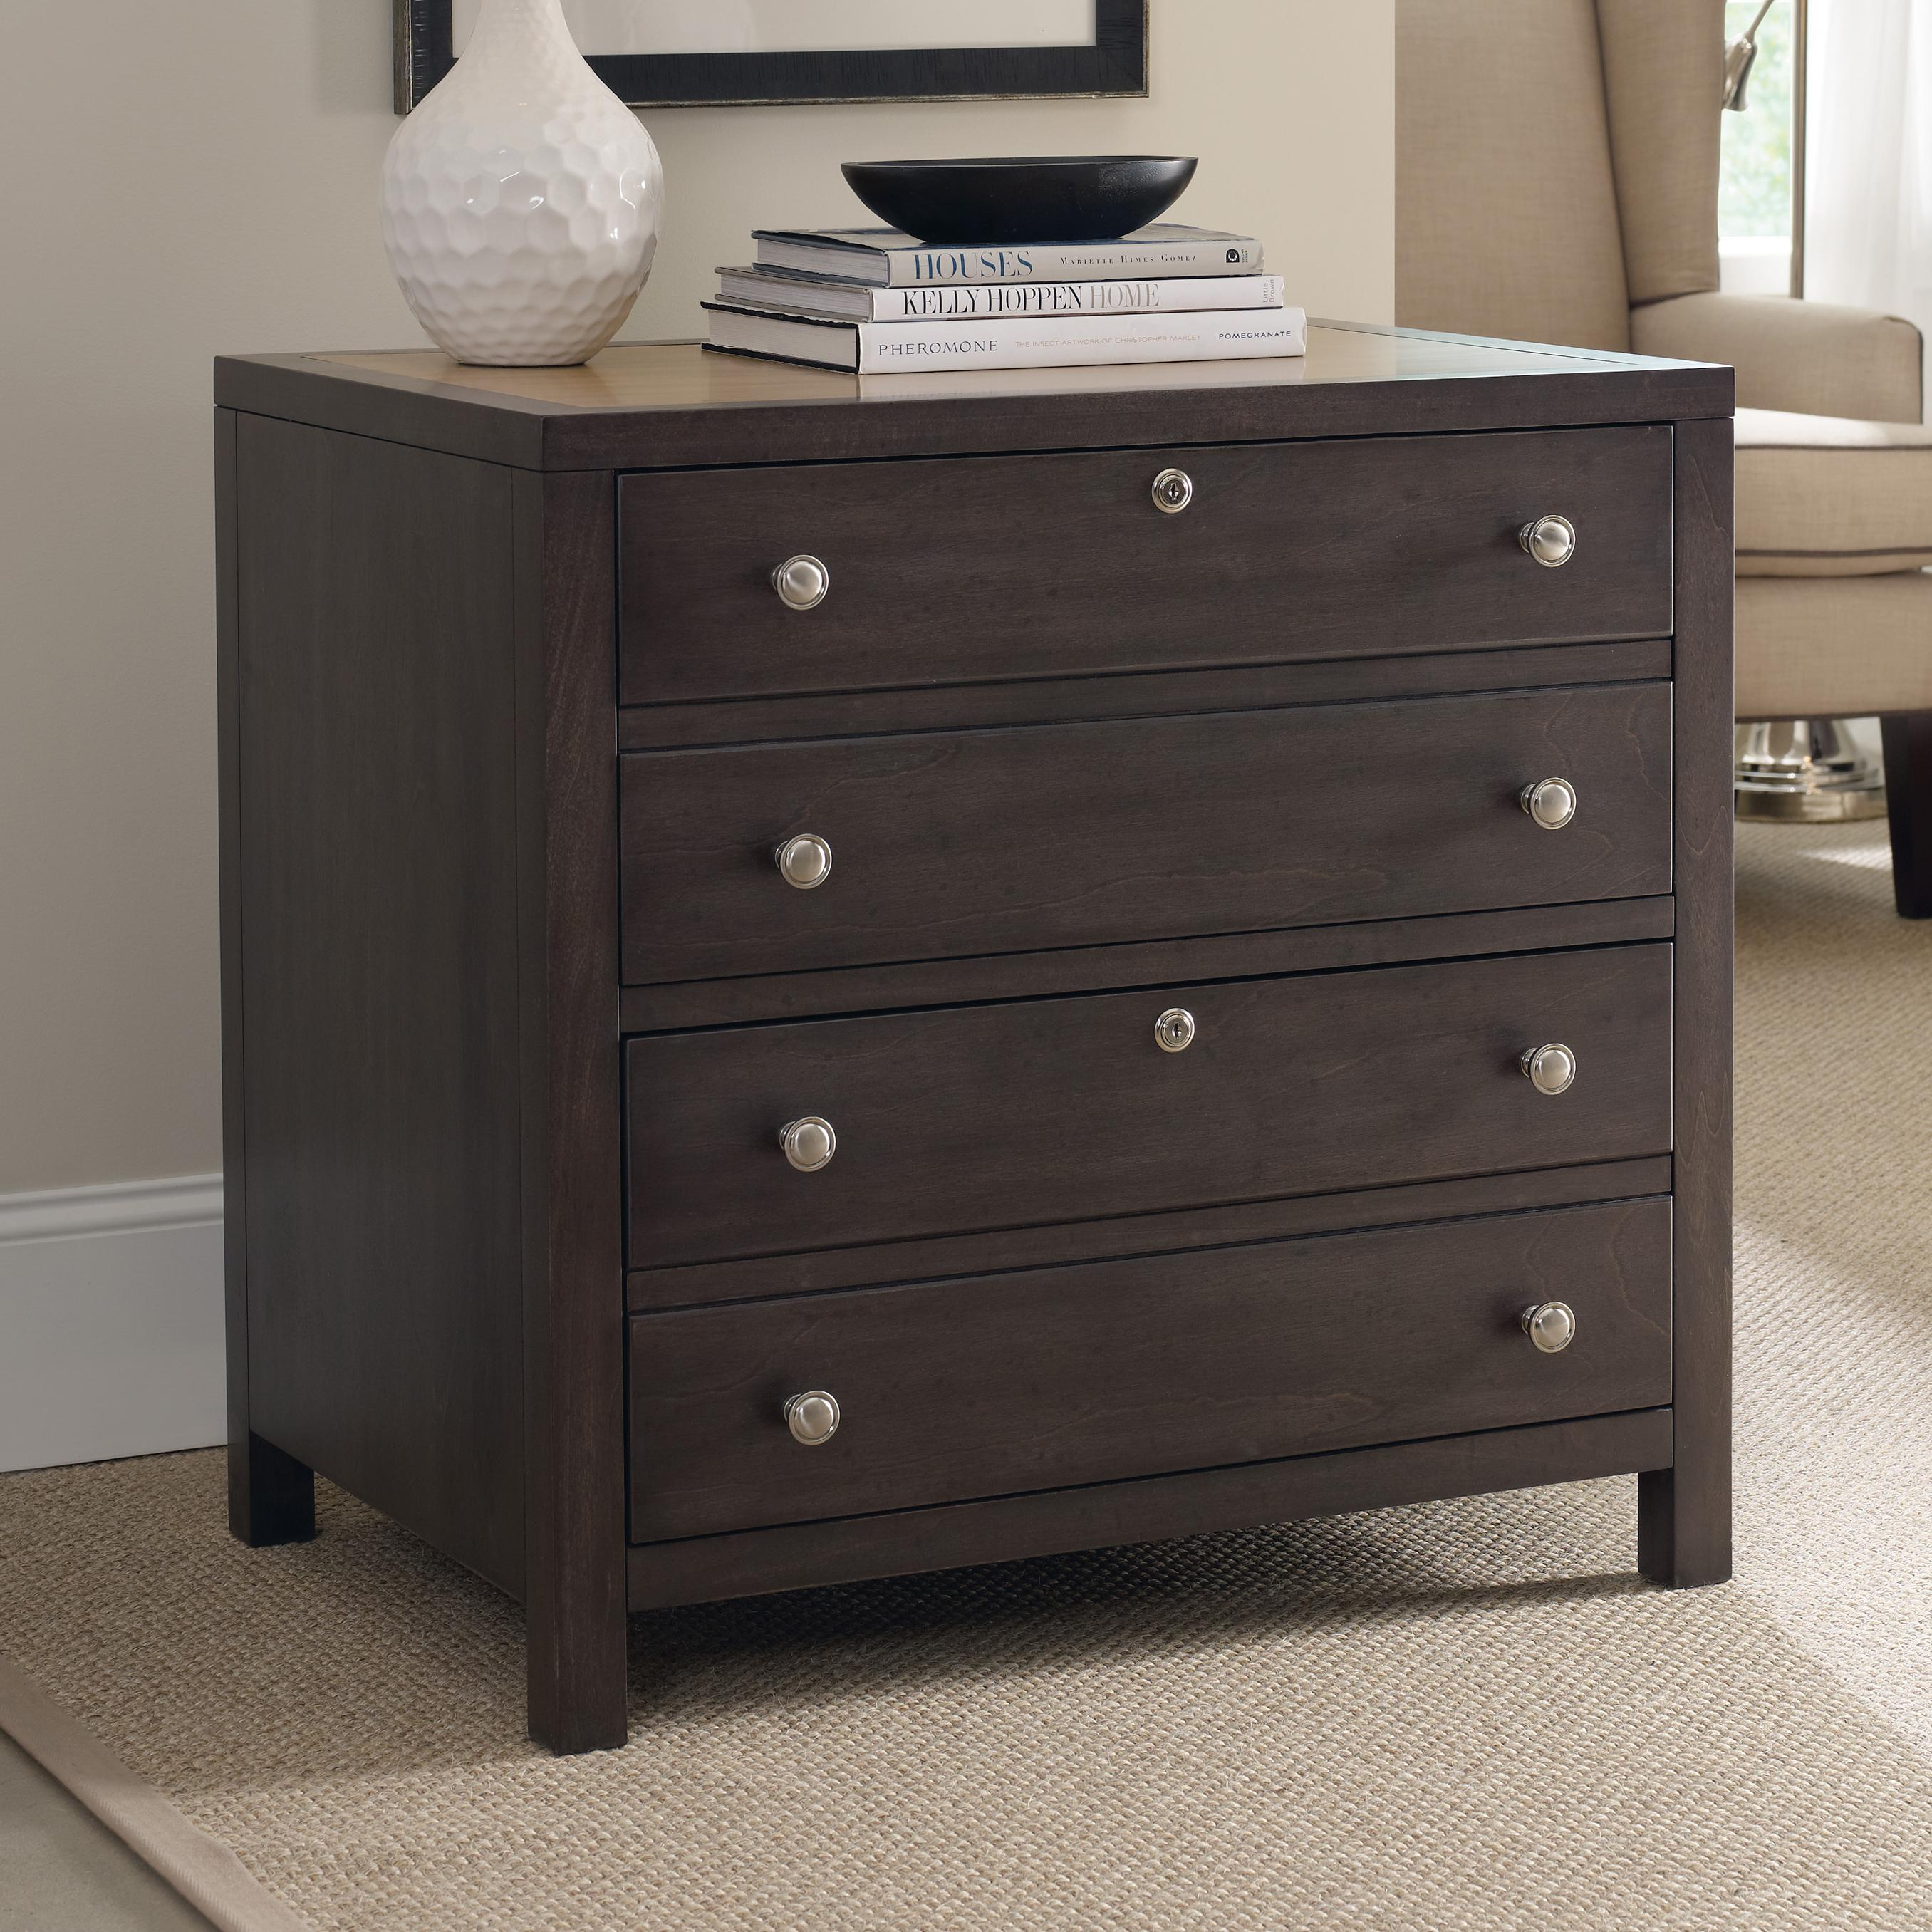 Hooker Furniture South Park 5078 10466 Lateral File Cabinet With 2 with size 2712 X 2712